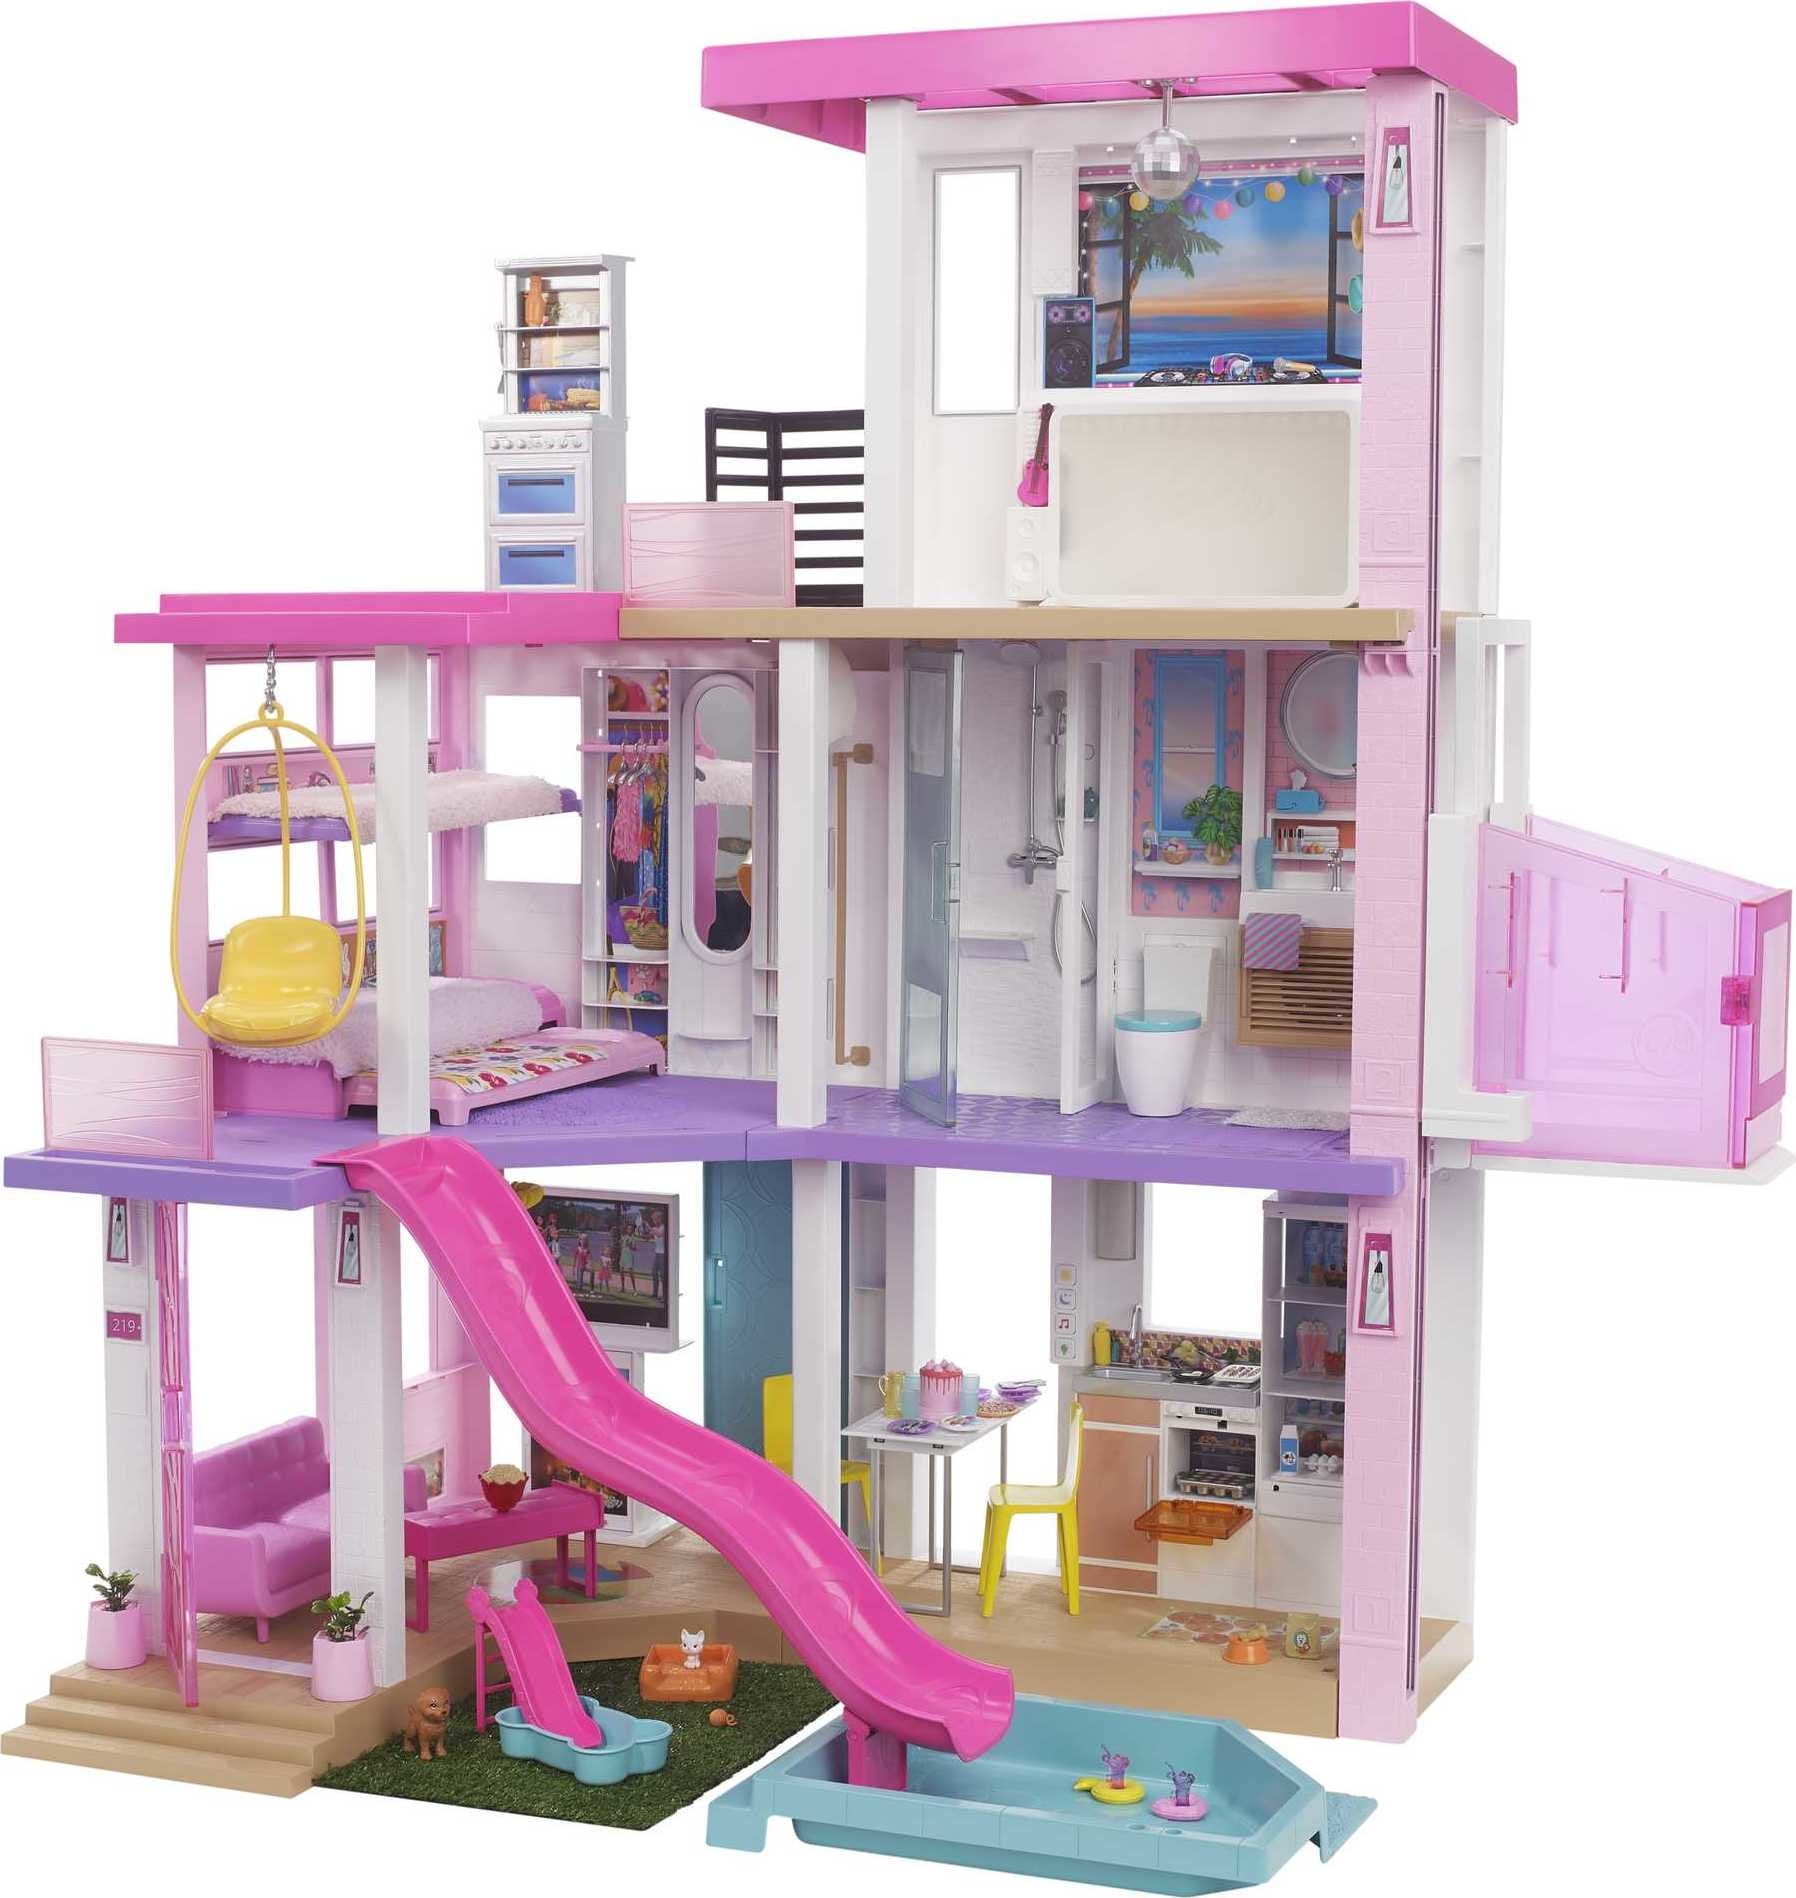 Barbie Dreamhouse Doll Playset Girls 3 Story with Accessories GNH53 